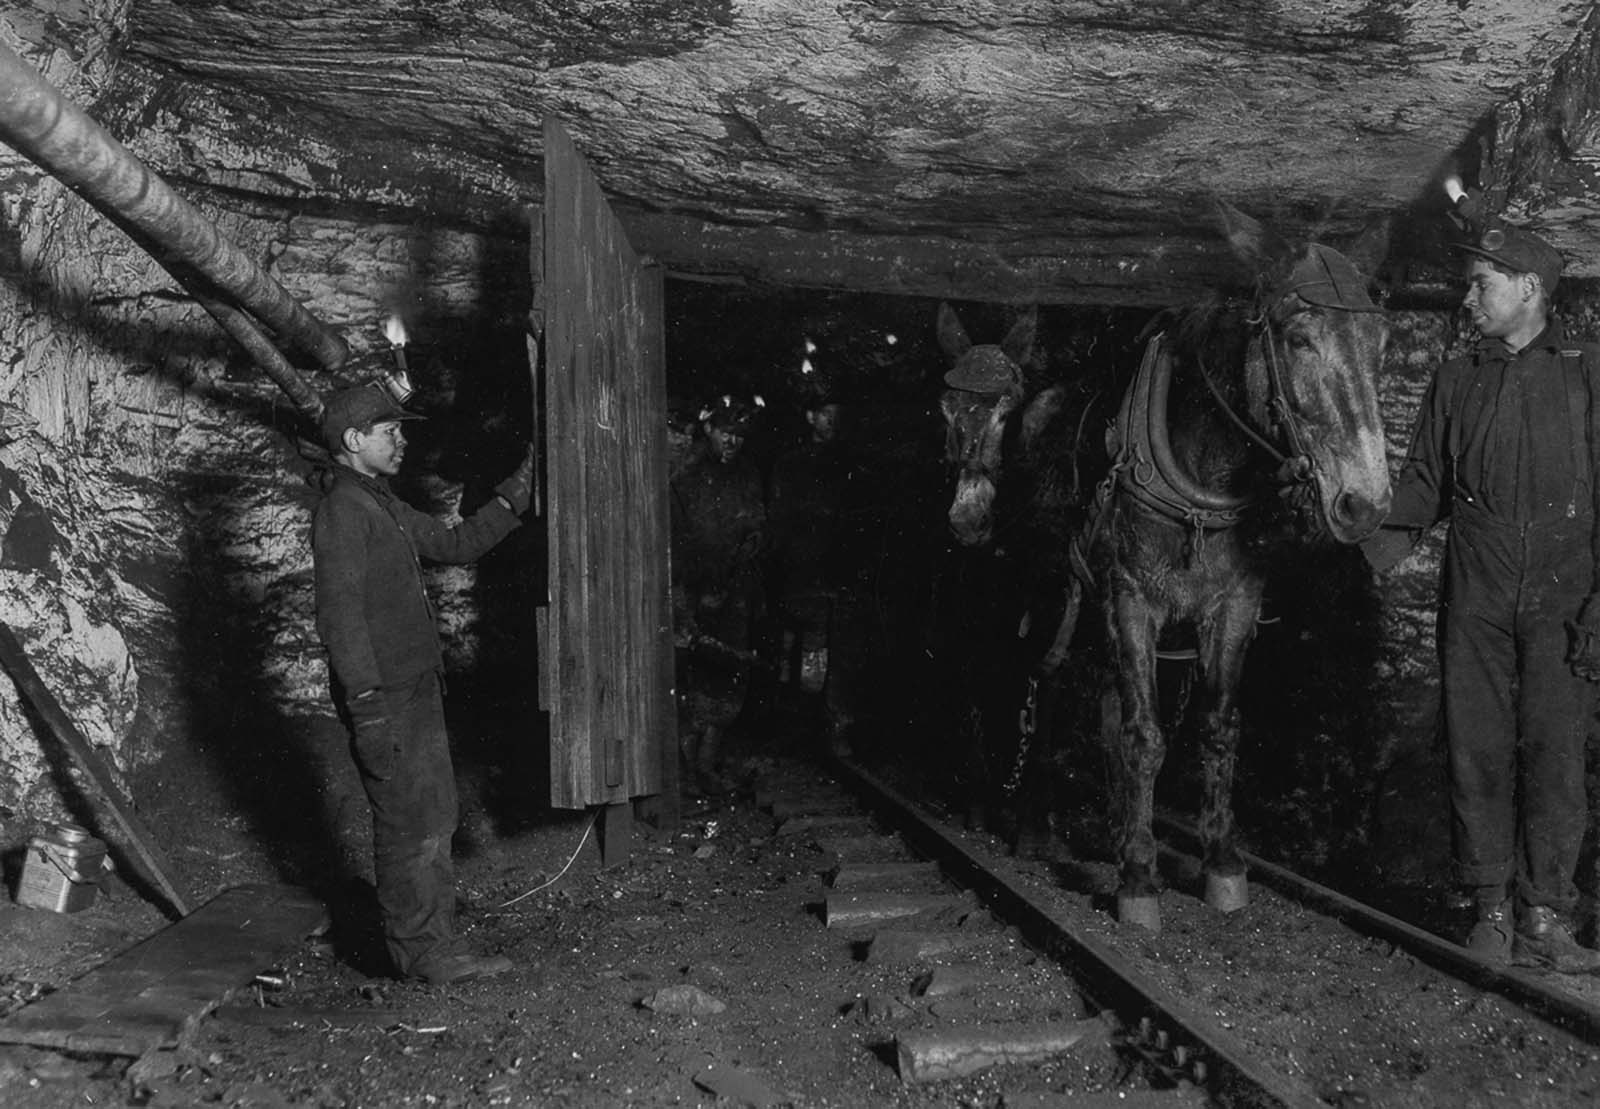 Willie Bryden, age 14, holds the door for a mule cart in a Pennsylvania mine, 1911